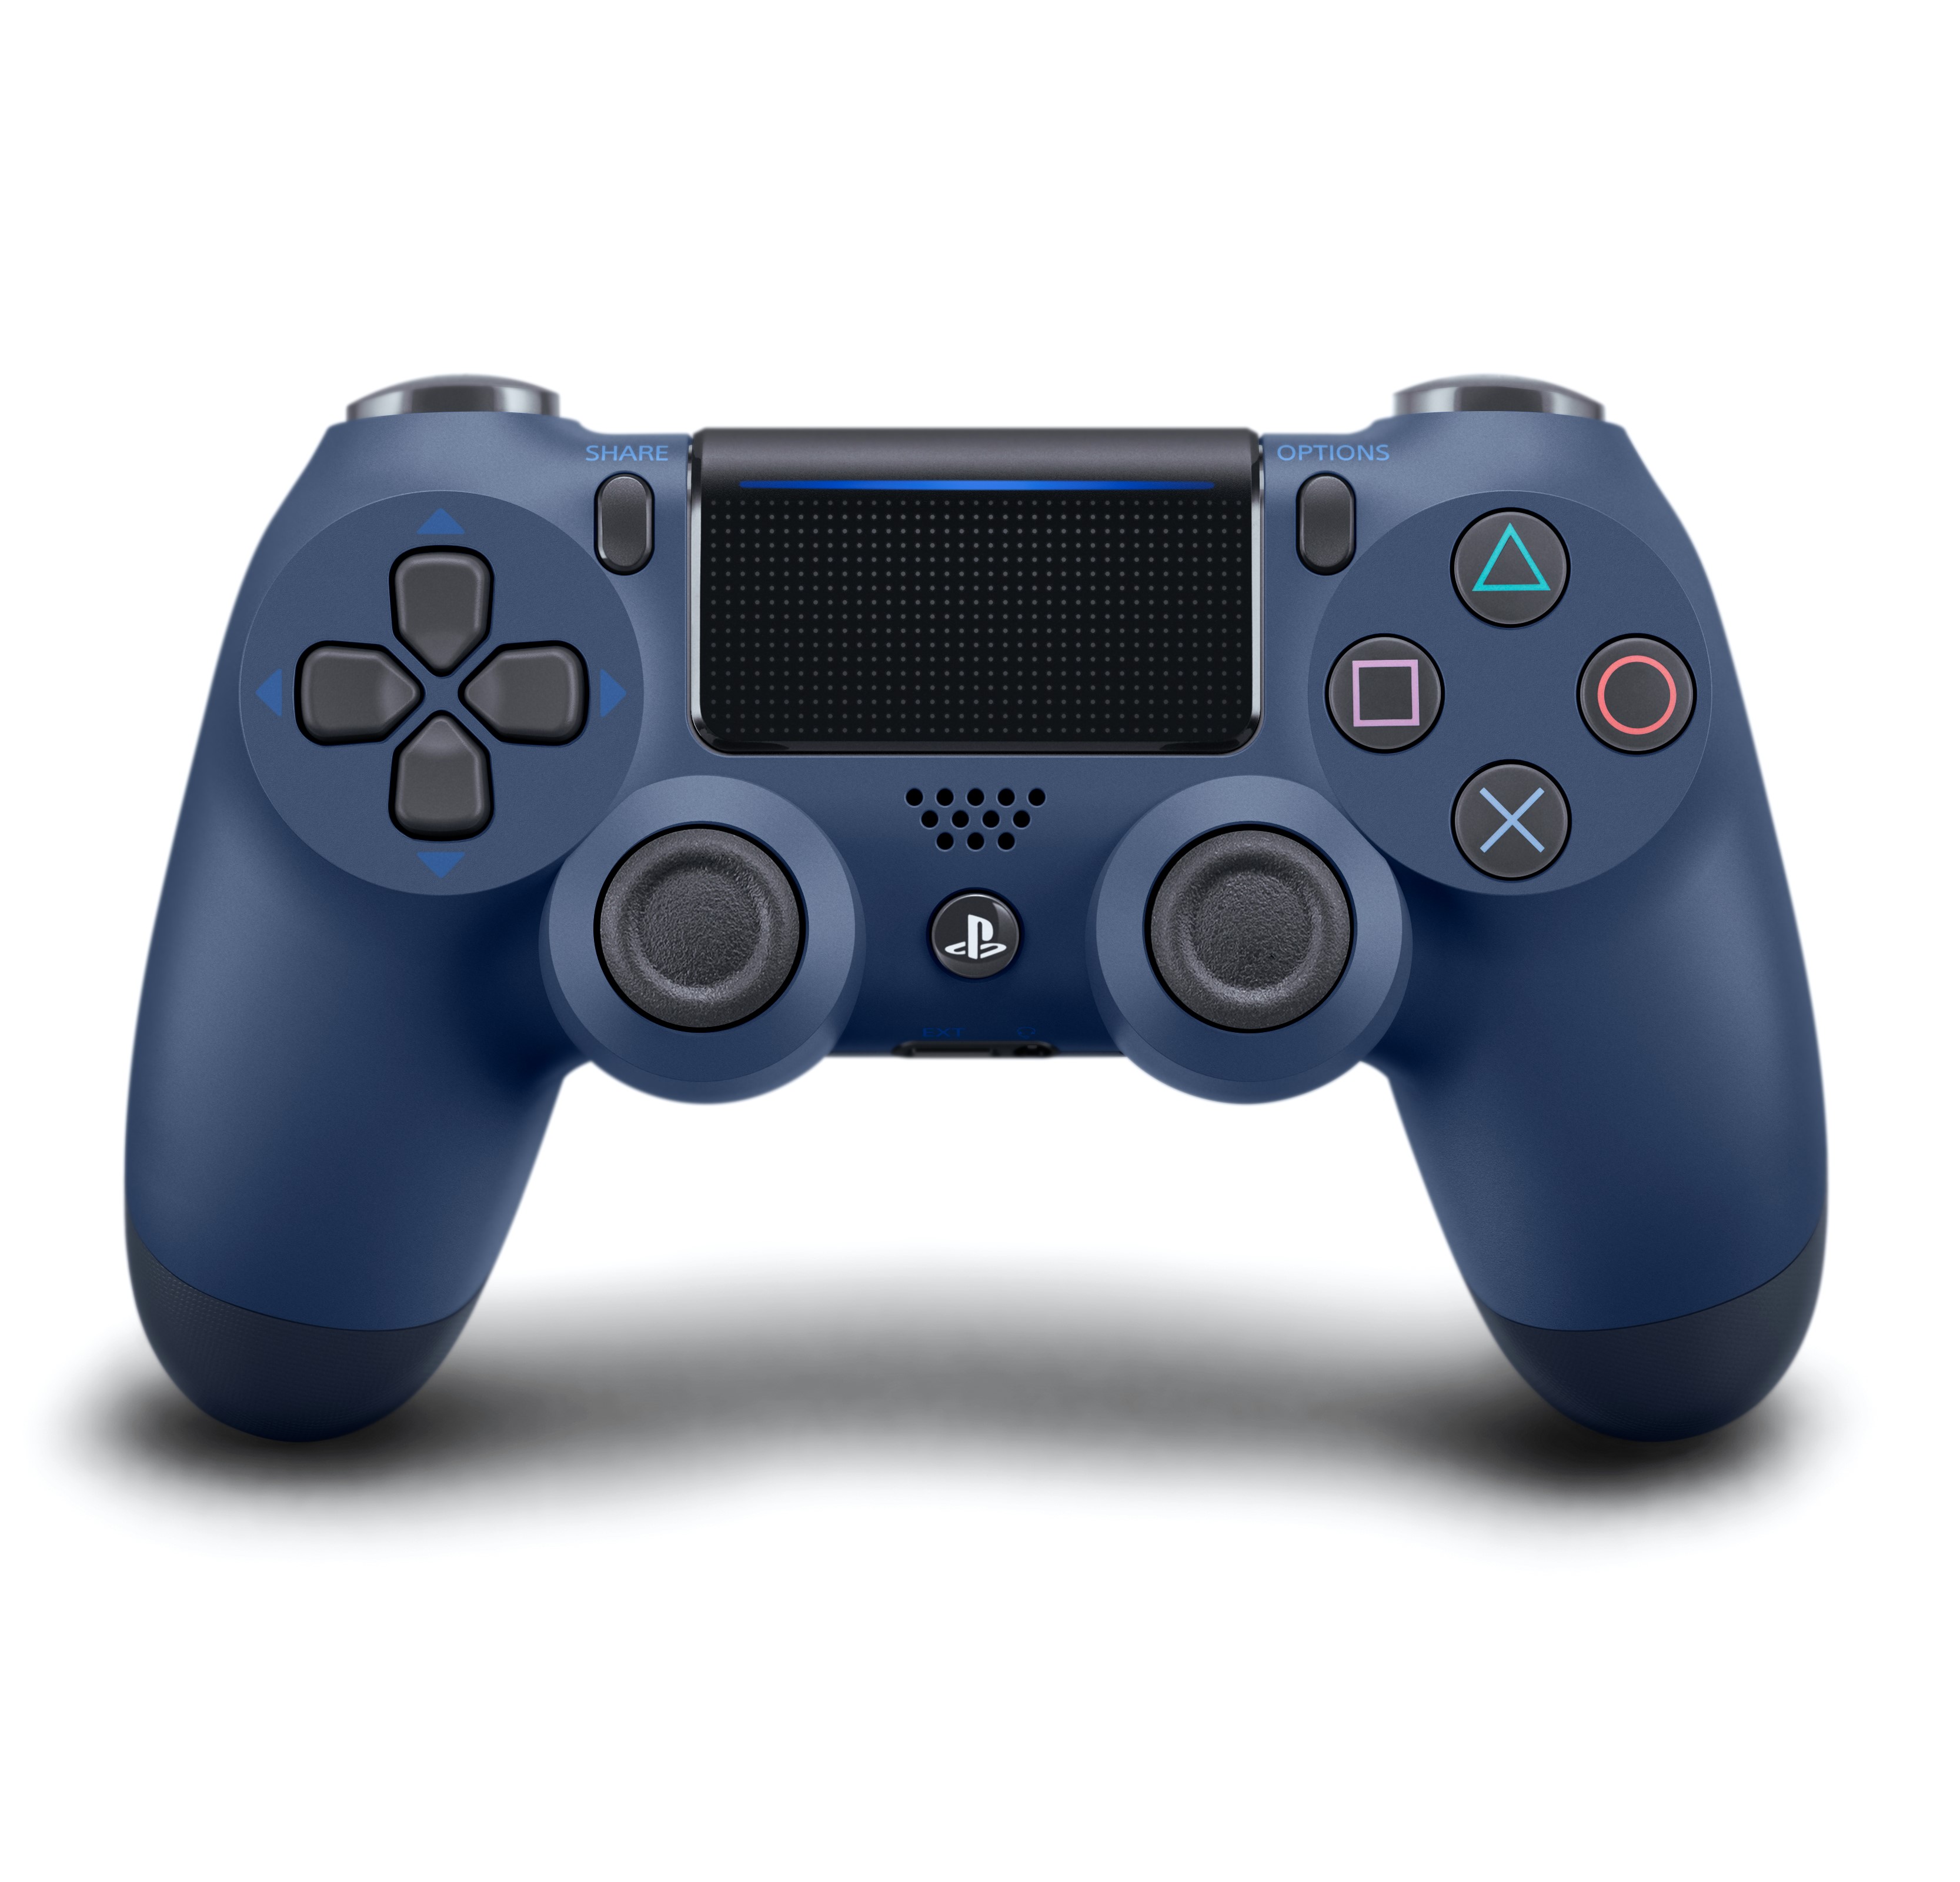 Sony PS4 DualShock 4 Wireless Controller - Midnight Blue - image 1 of 5